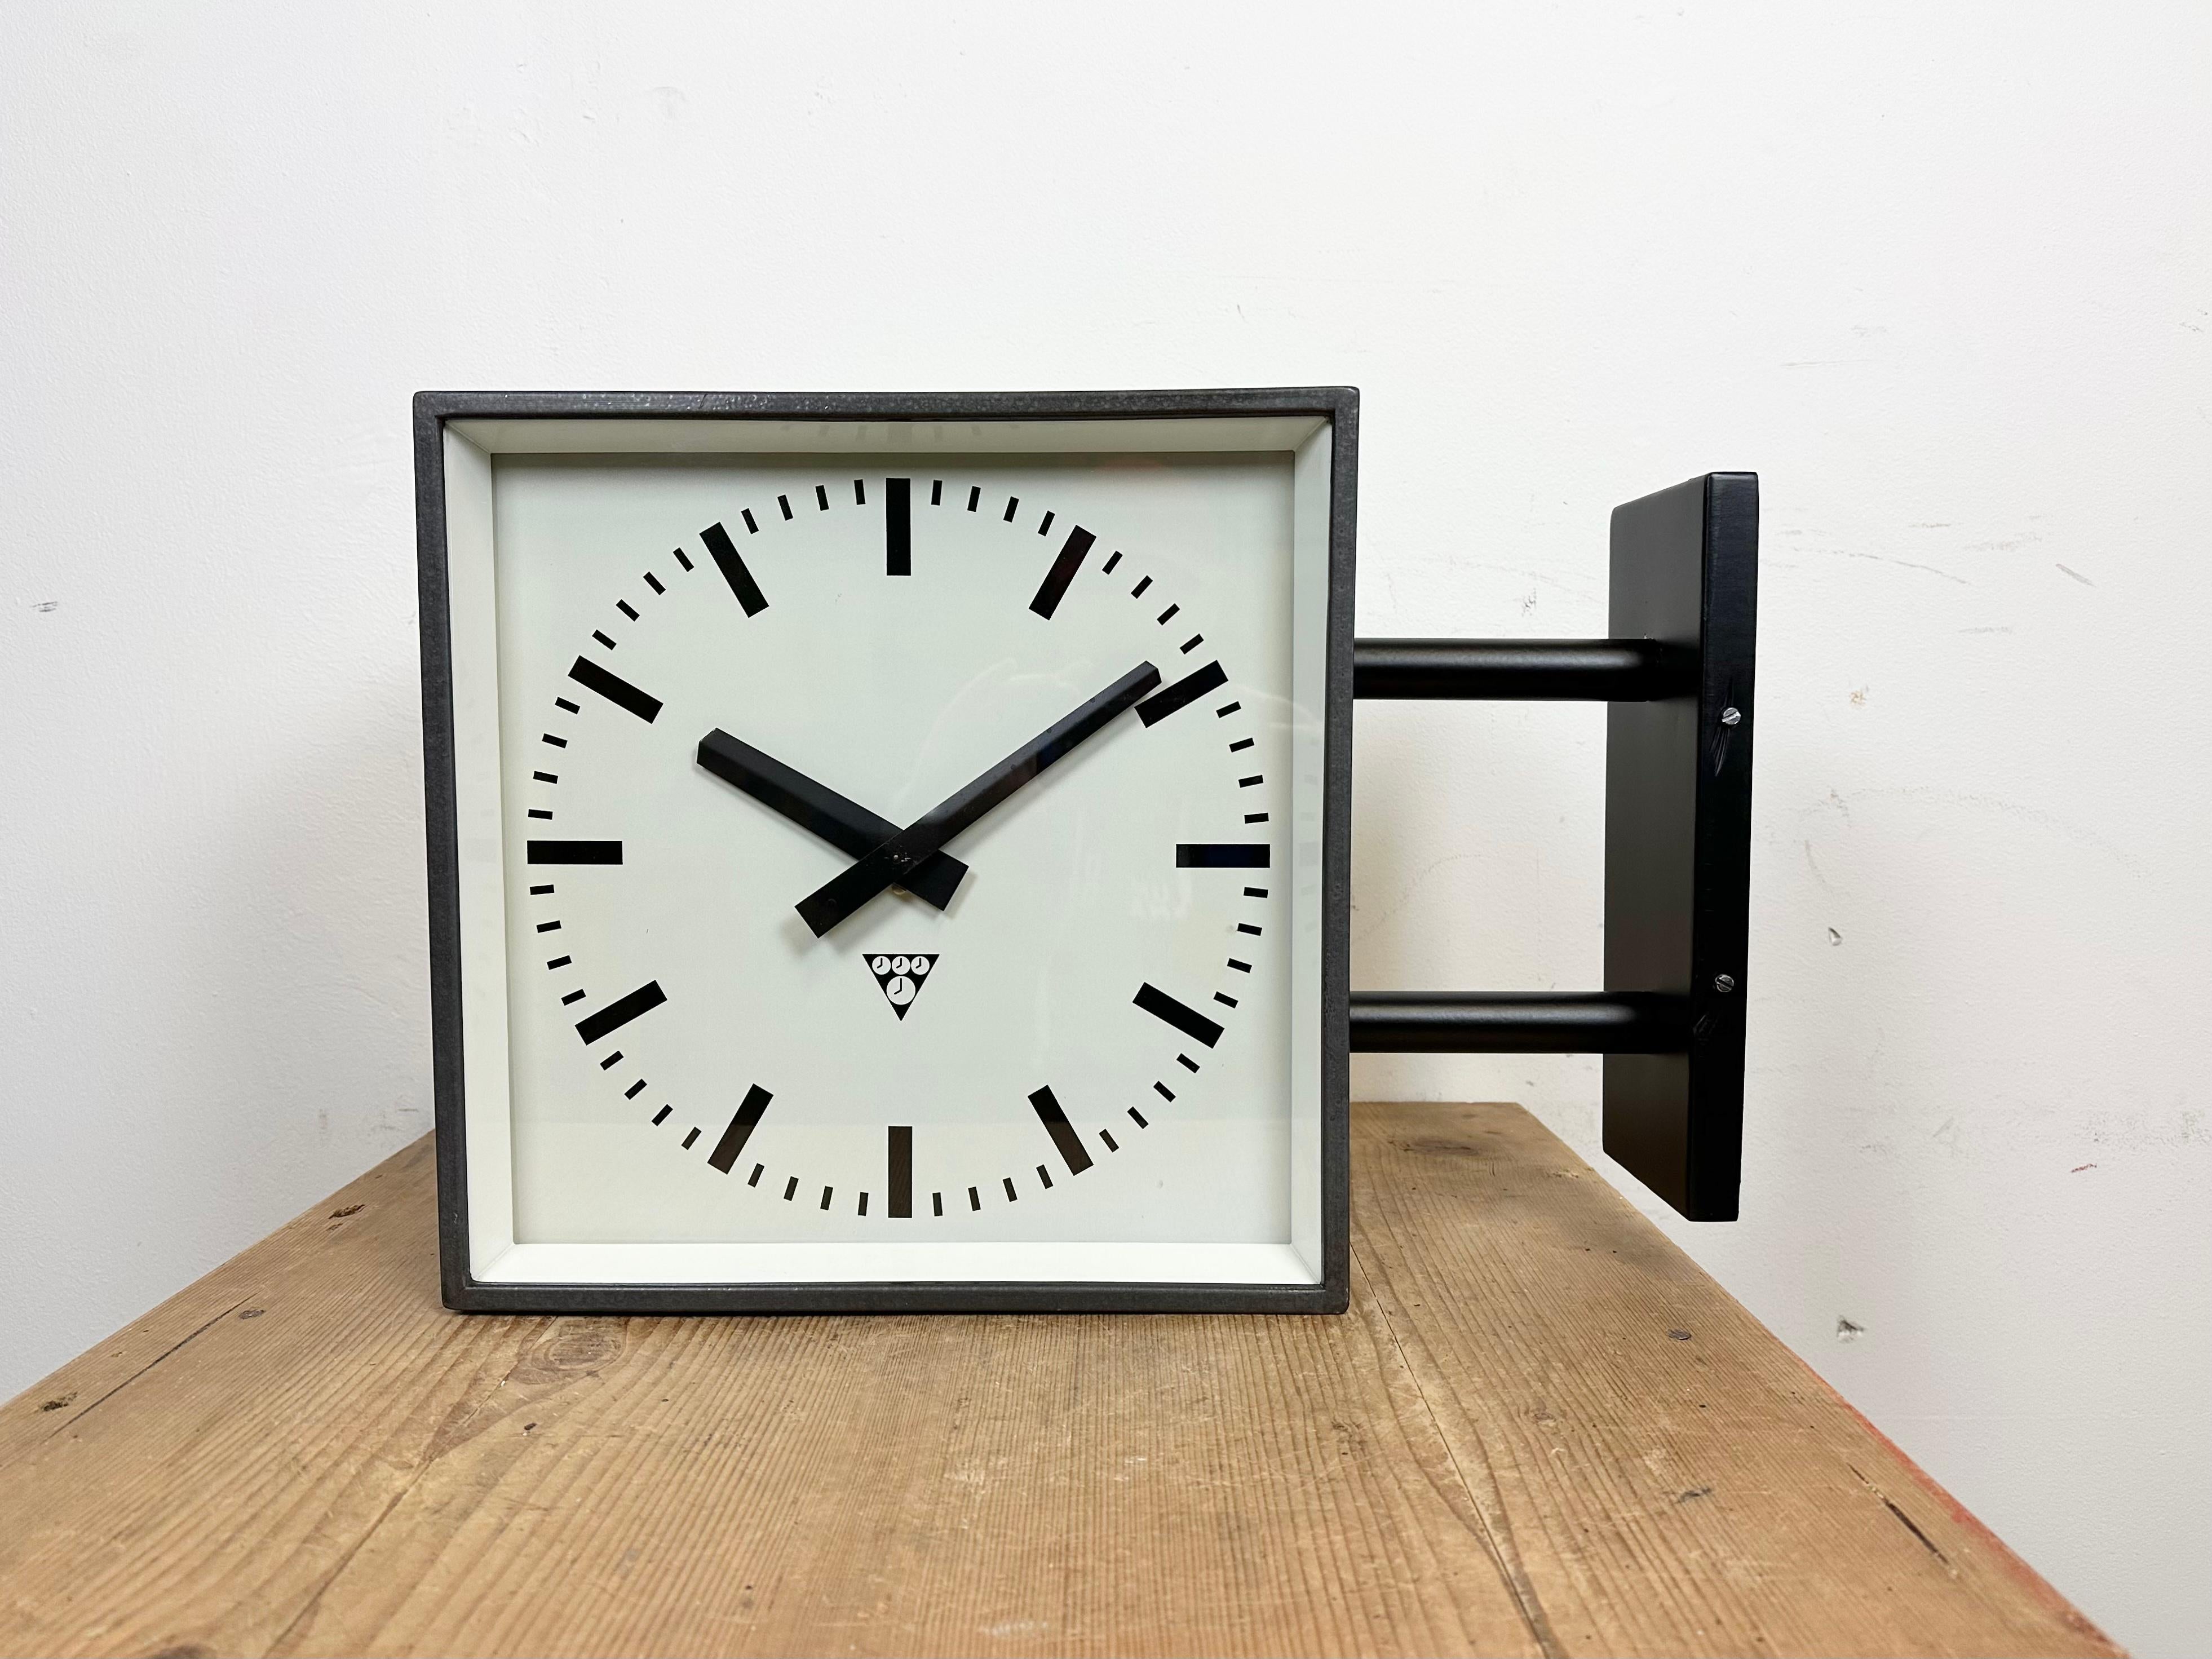 This square double-sided railway, school or factory wall clock was produced by Pragotron, in former Czechoslovakia, during the 1970s. The piece features a black metal body, a dark grey hammerpaint clock frames, a clear glass cover, and an aluminum